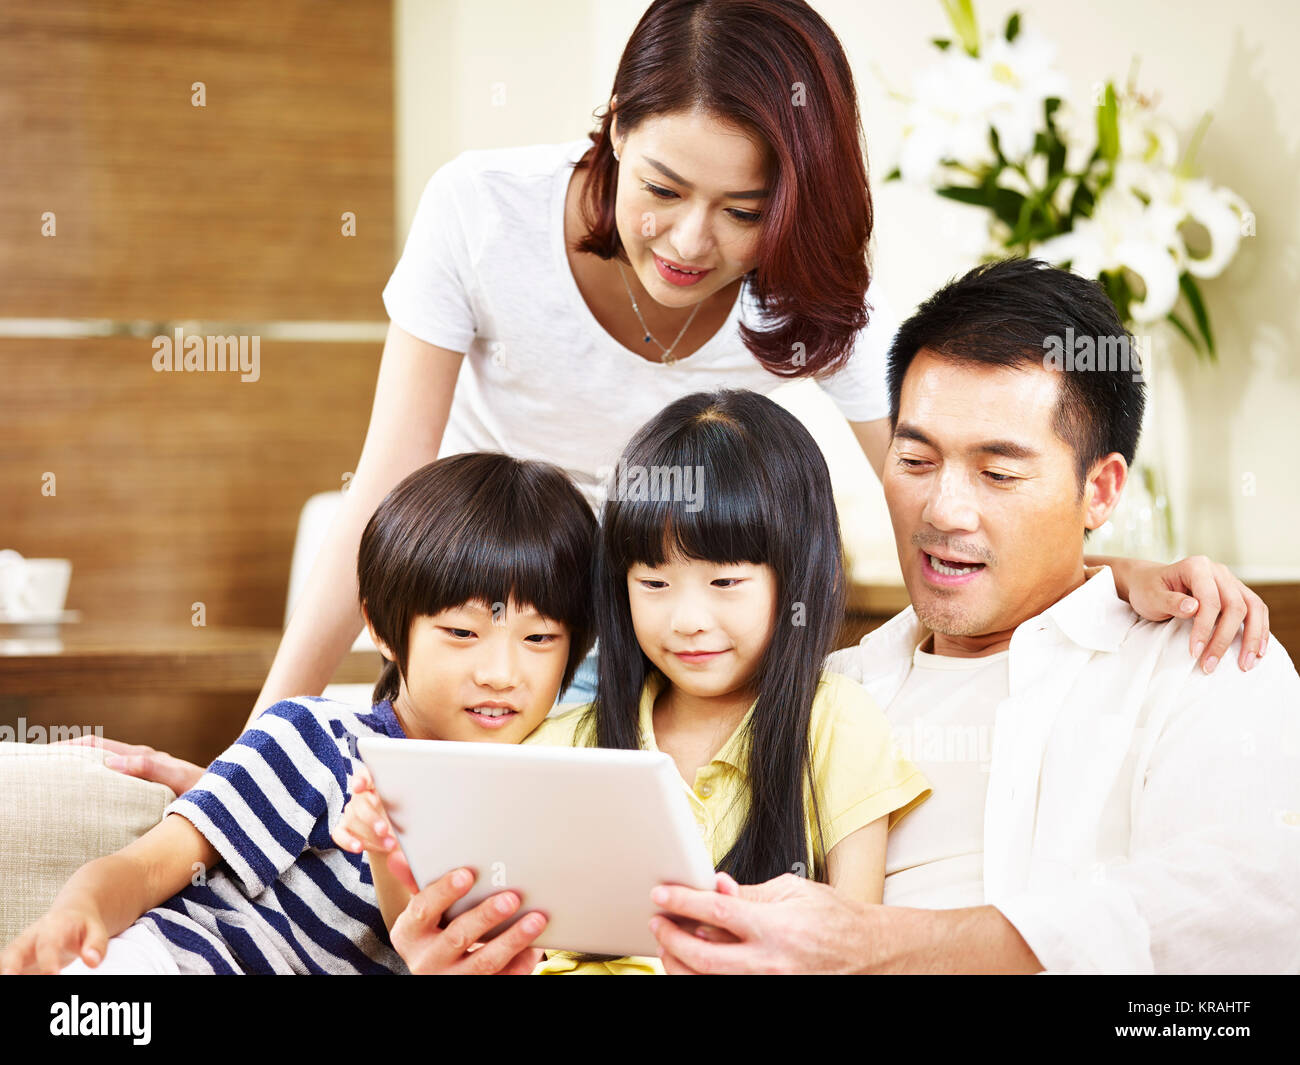 asian parents mother and father and two children son and daughter sitting on family couch using digital tablet together. Stock Photo